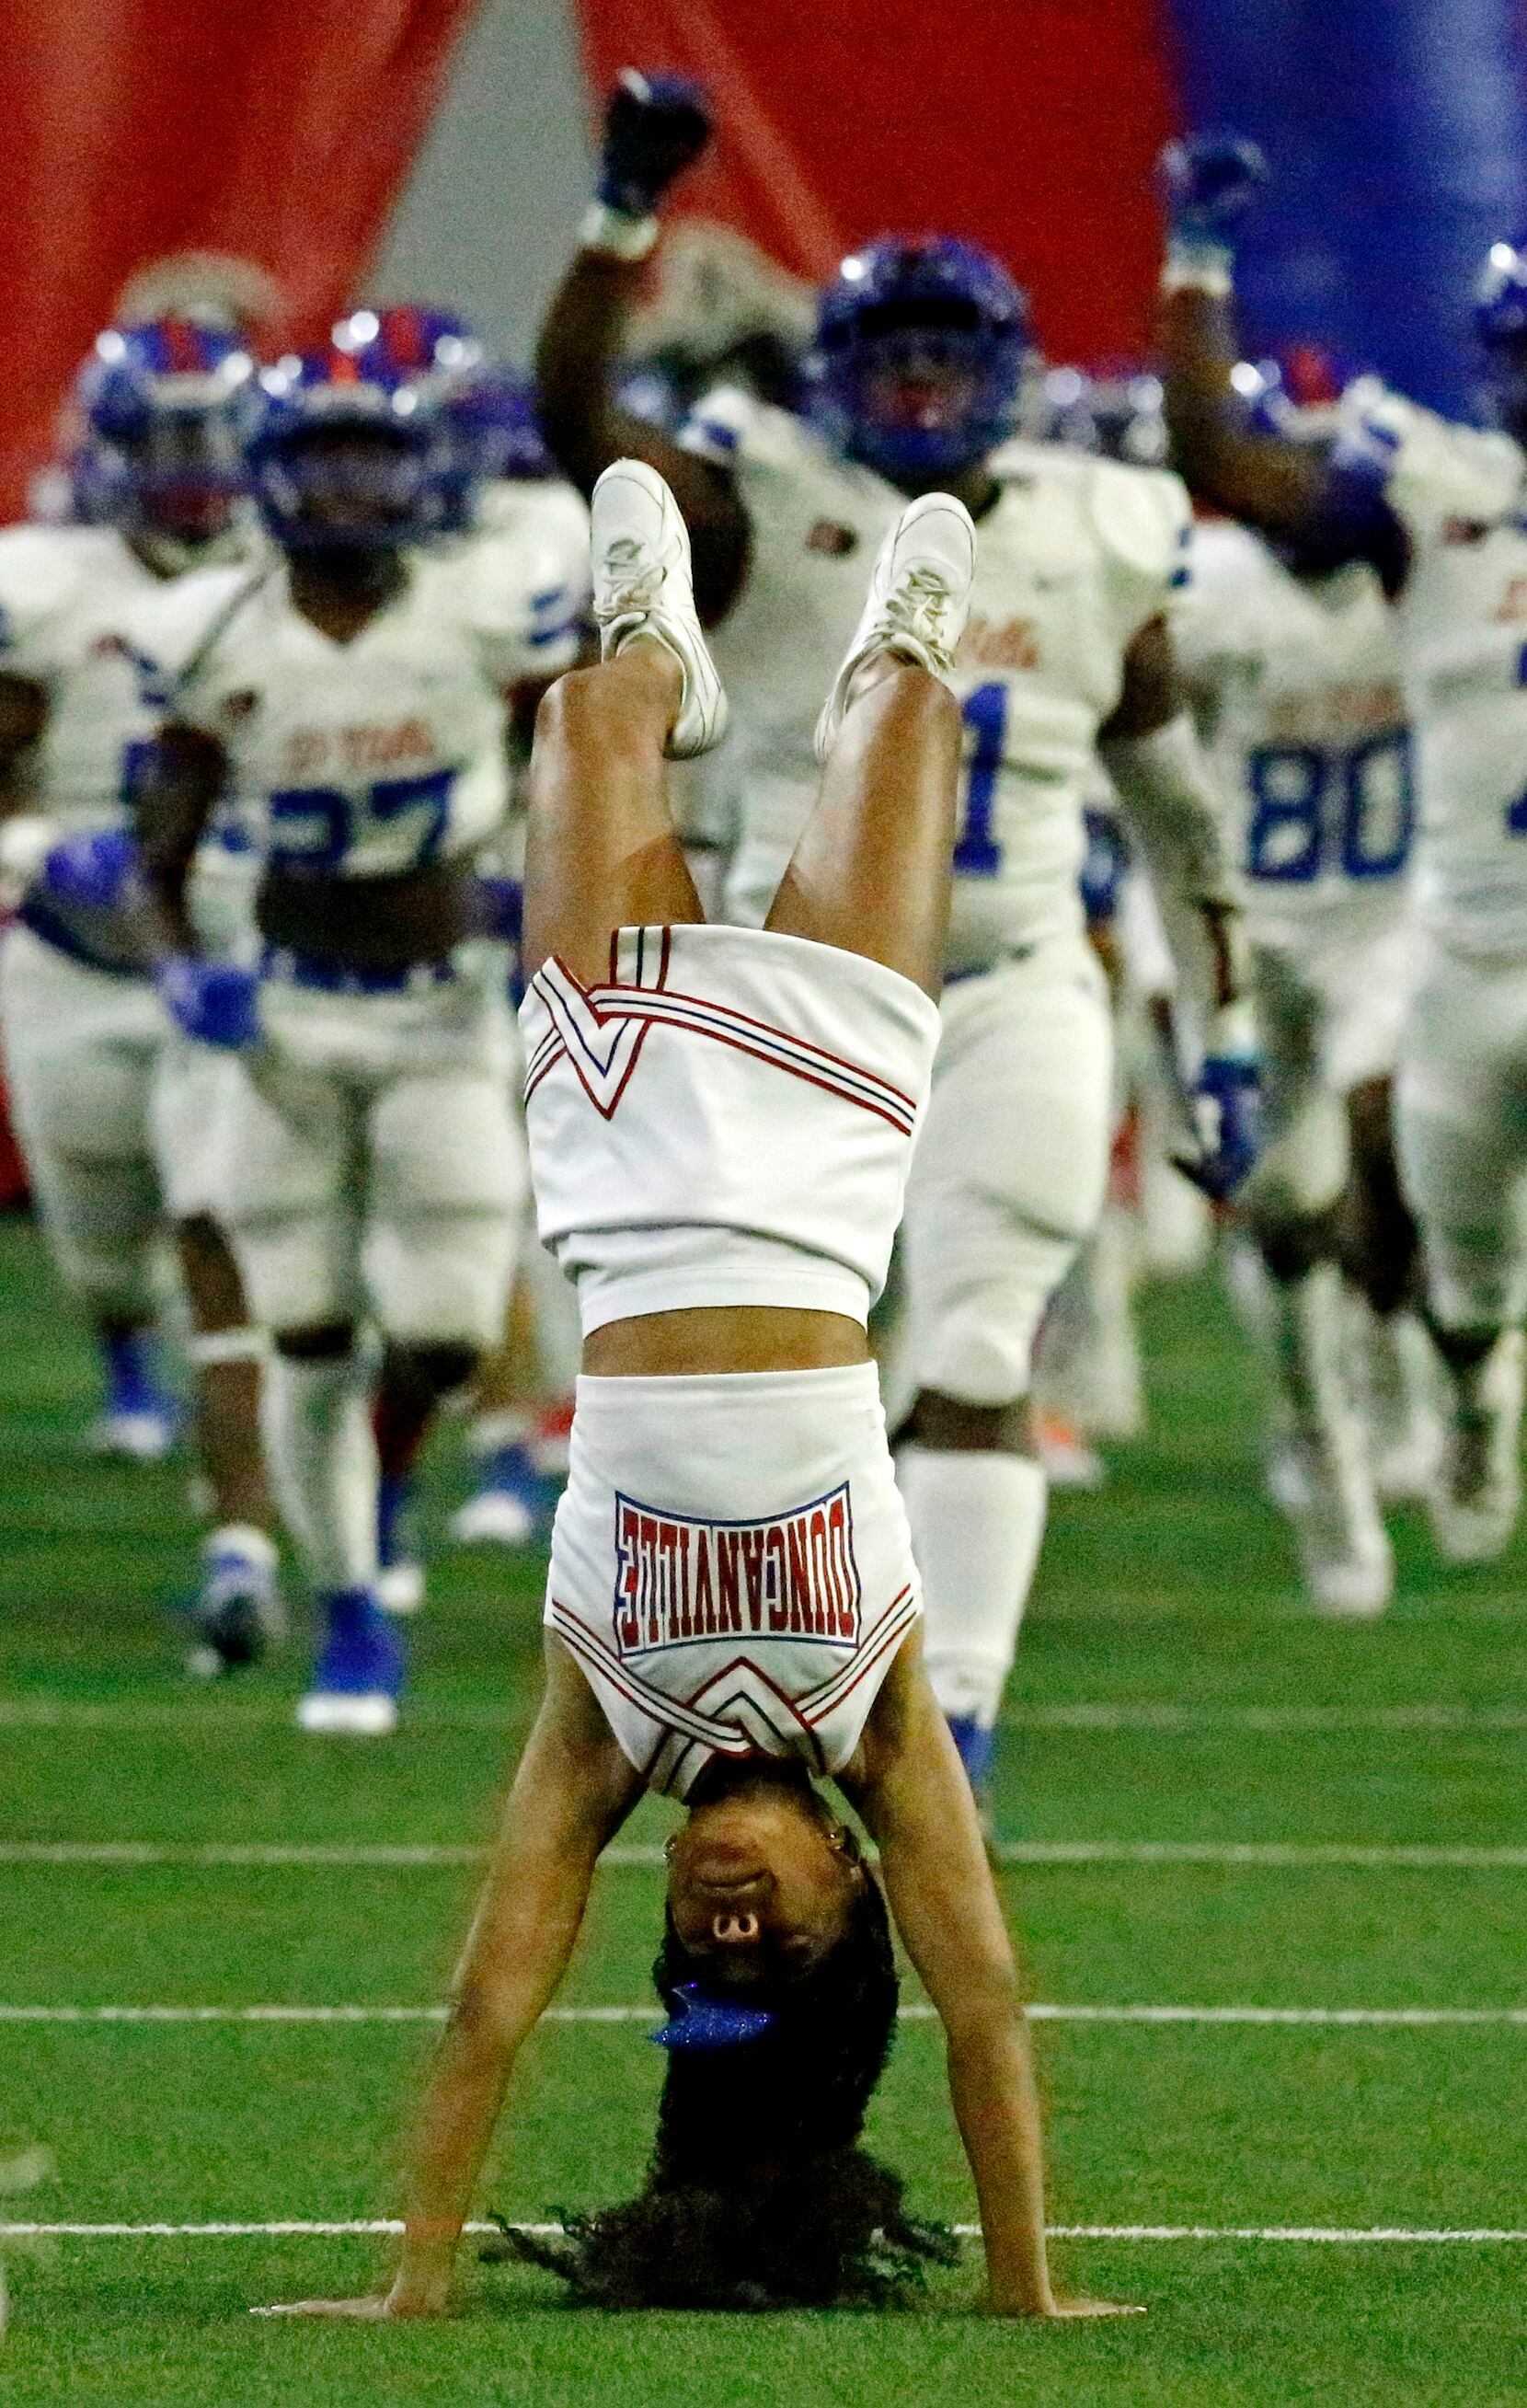 Duncanville cheerleaders do backflips in front of their team entering the field before...